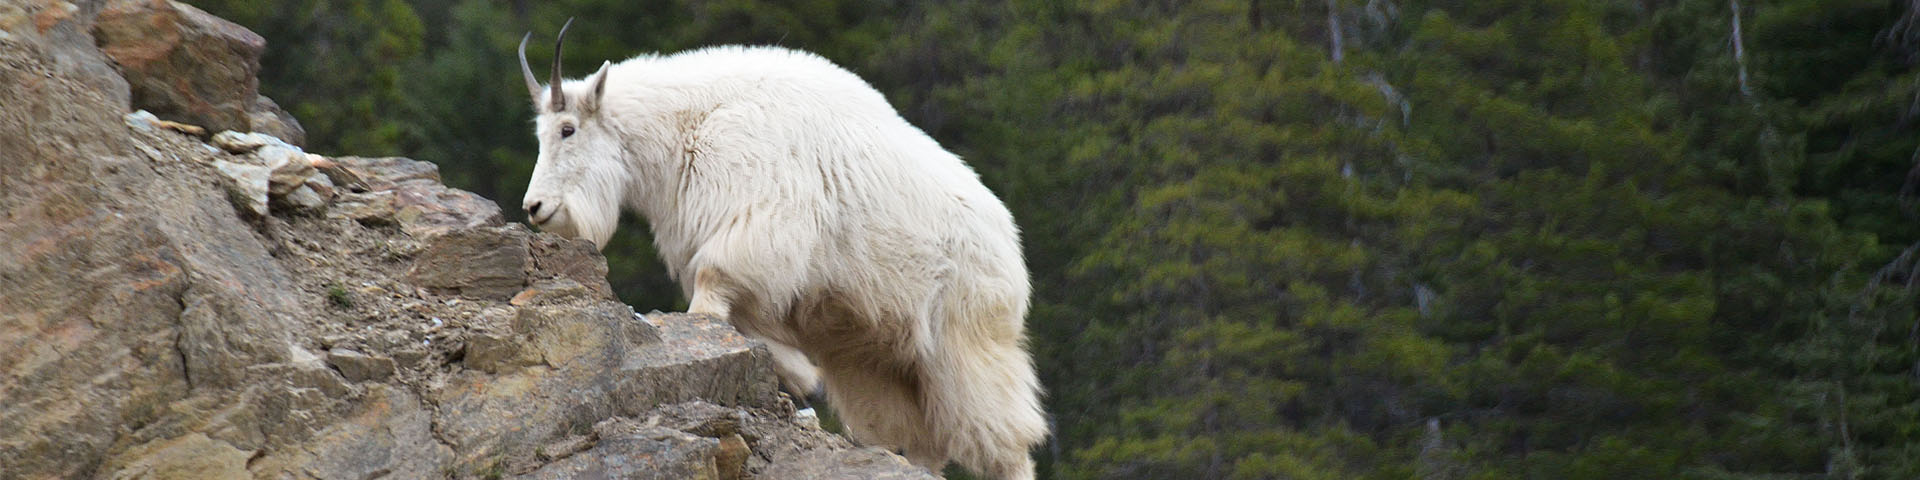 A mountain goat on a rocky slope in Glacier National Park